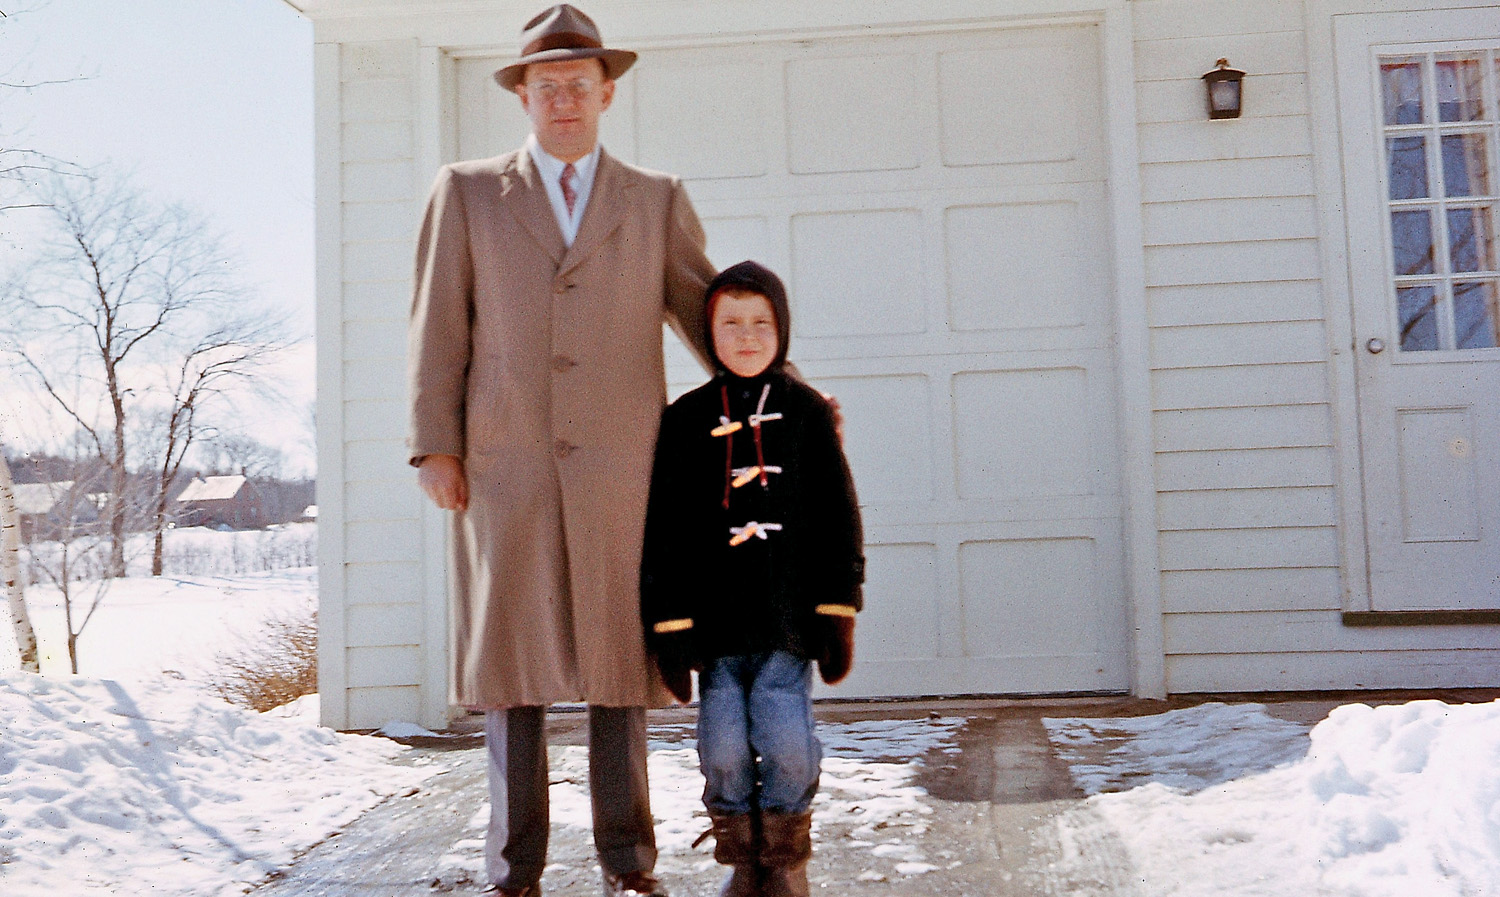 Same location as the Hula Hoop photo - our driveway - with Dad and me in winter 1958. We lived literally on the edge of town, as seen by the background countryside and woods. That was our playground, summer and winter, for my friends and me, the best childhood anyone could ask for. No helicopter parenting, no electronic distractions. We never felt we were missing something. A Google Earth view shows that countryside is now subdivision. View full size.